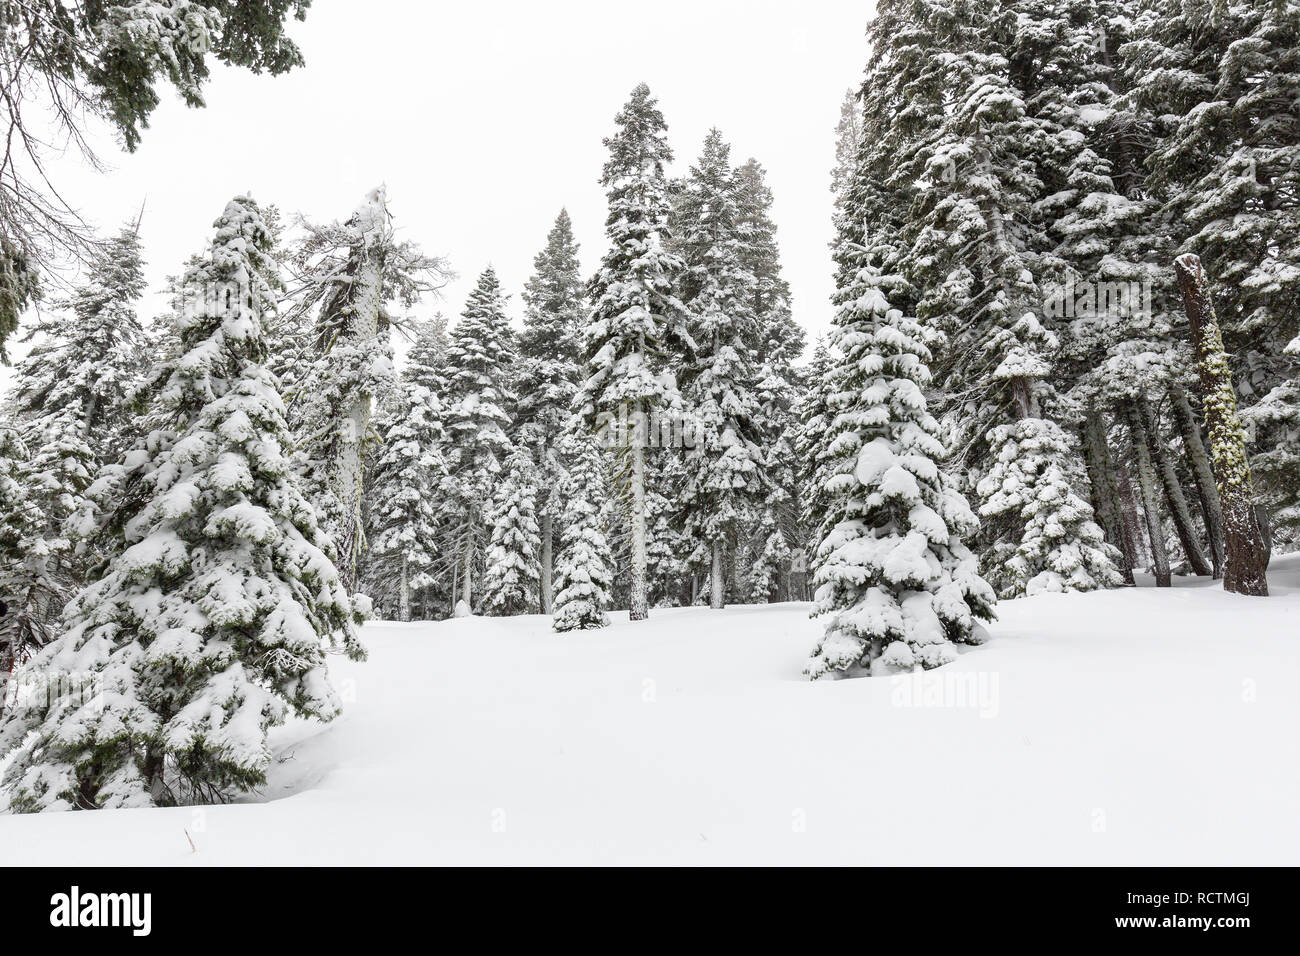 Snow blankets a pine tree forest after a winter storm in Eldorado National Forest, California. Stock Photo